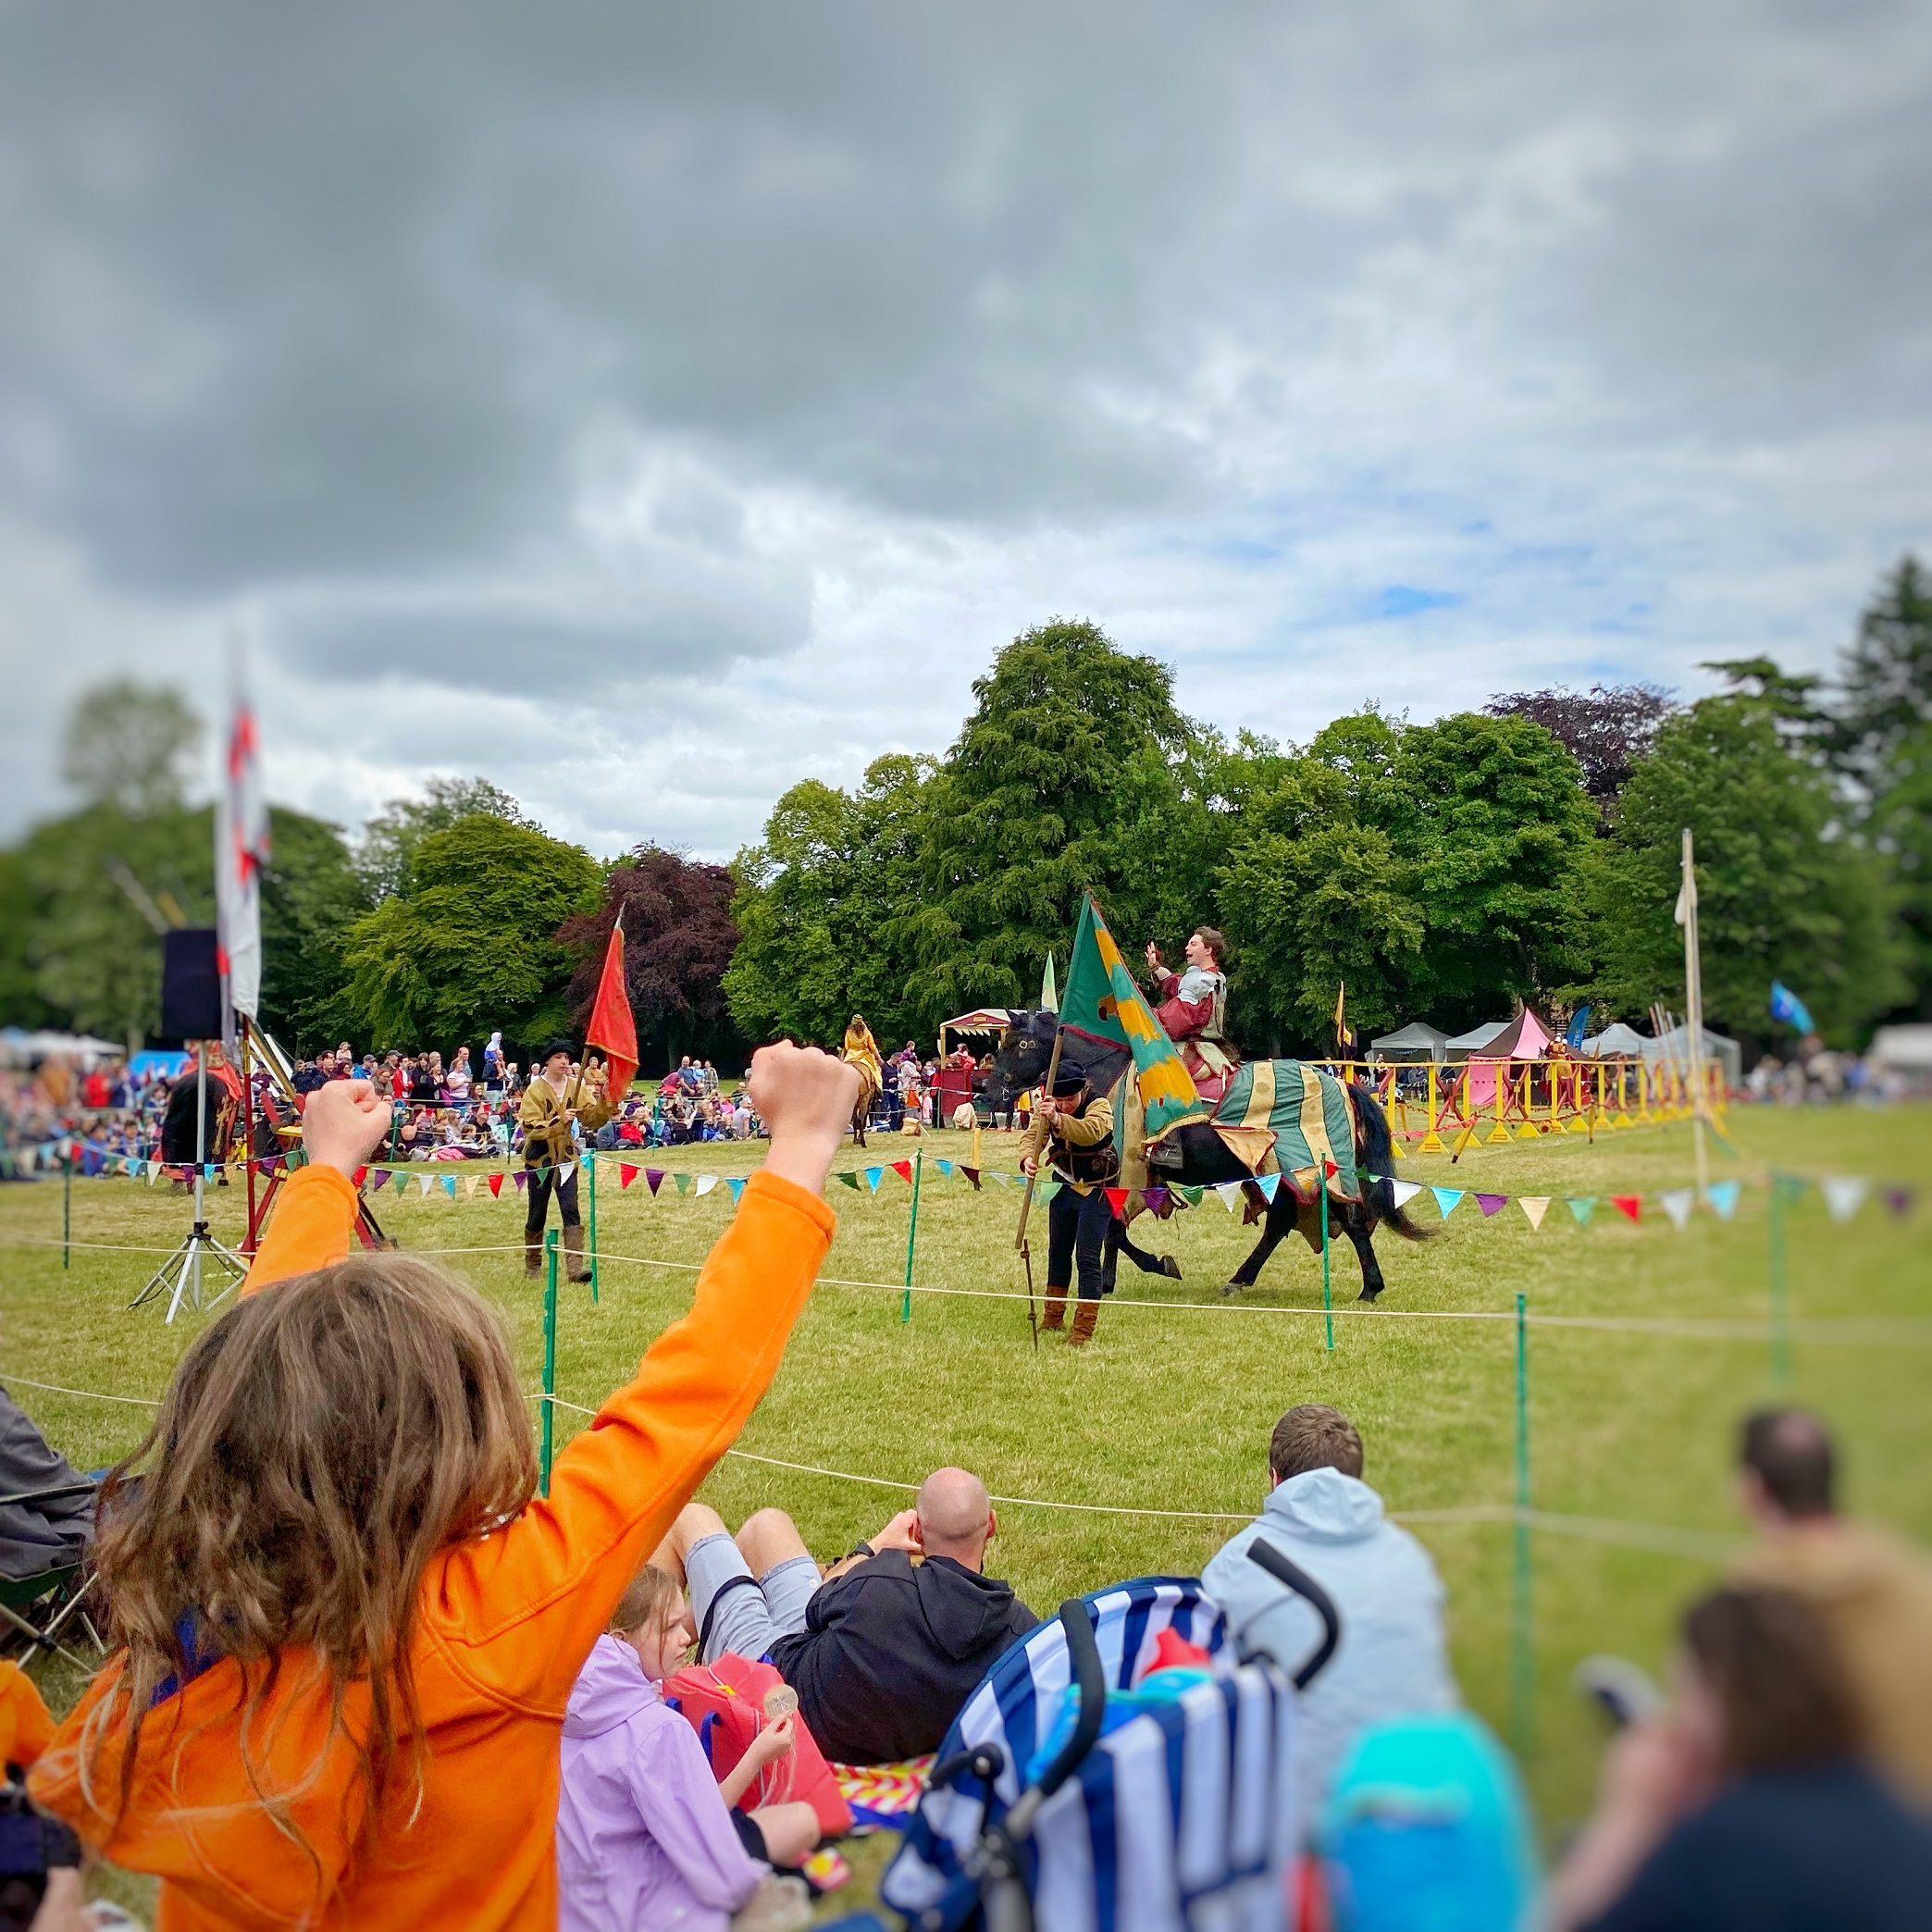 Photo taken at a jousting tournament at Linlithgow Palace. You can see a cheering child in the crowd with their back to the camera watching the tournament.